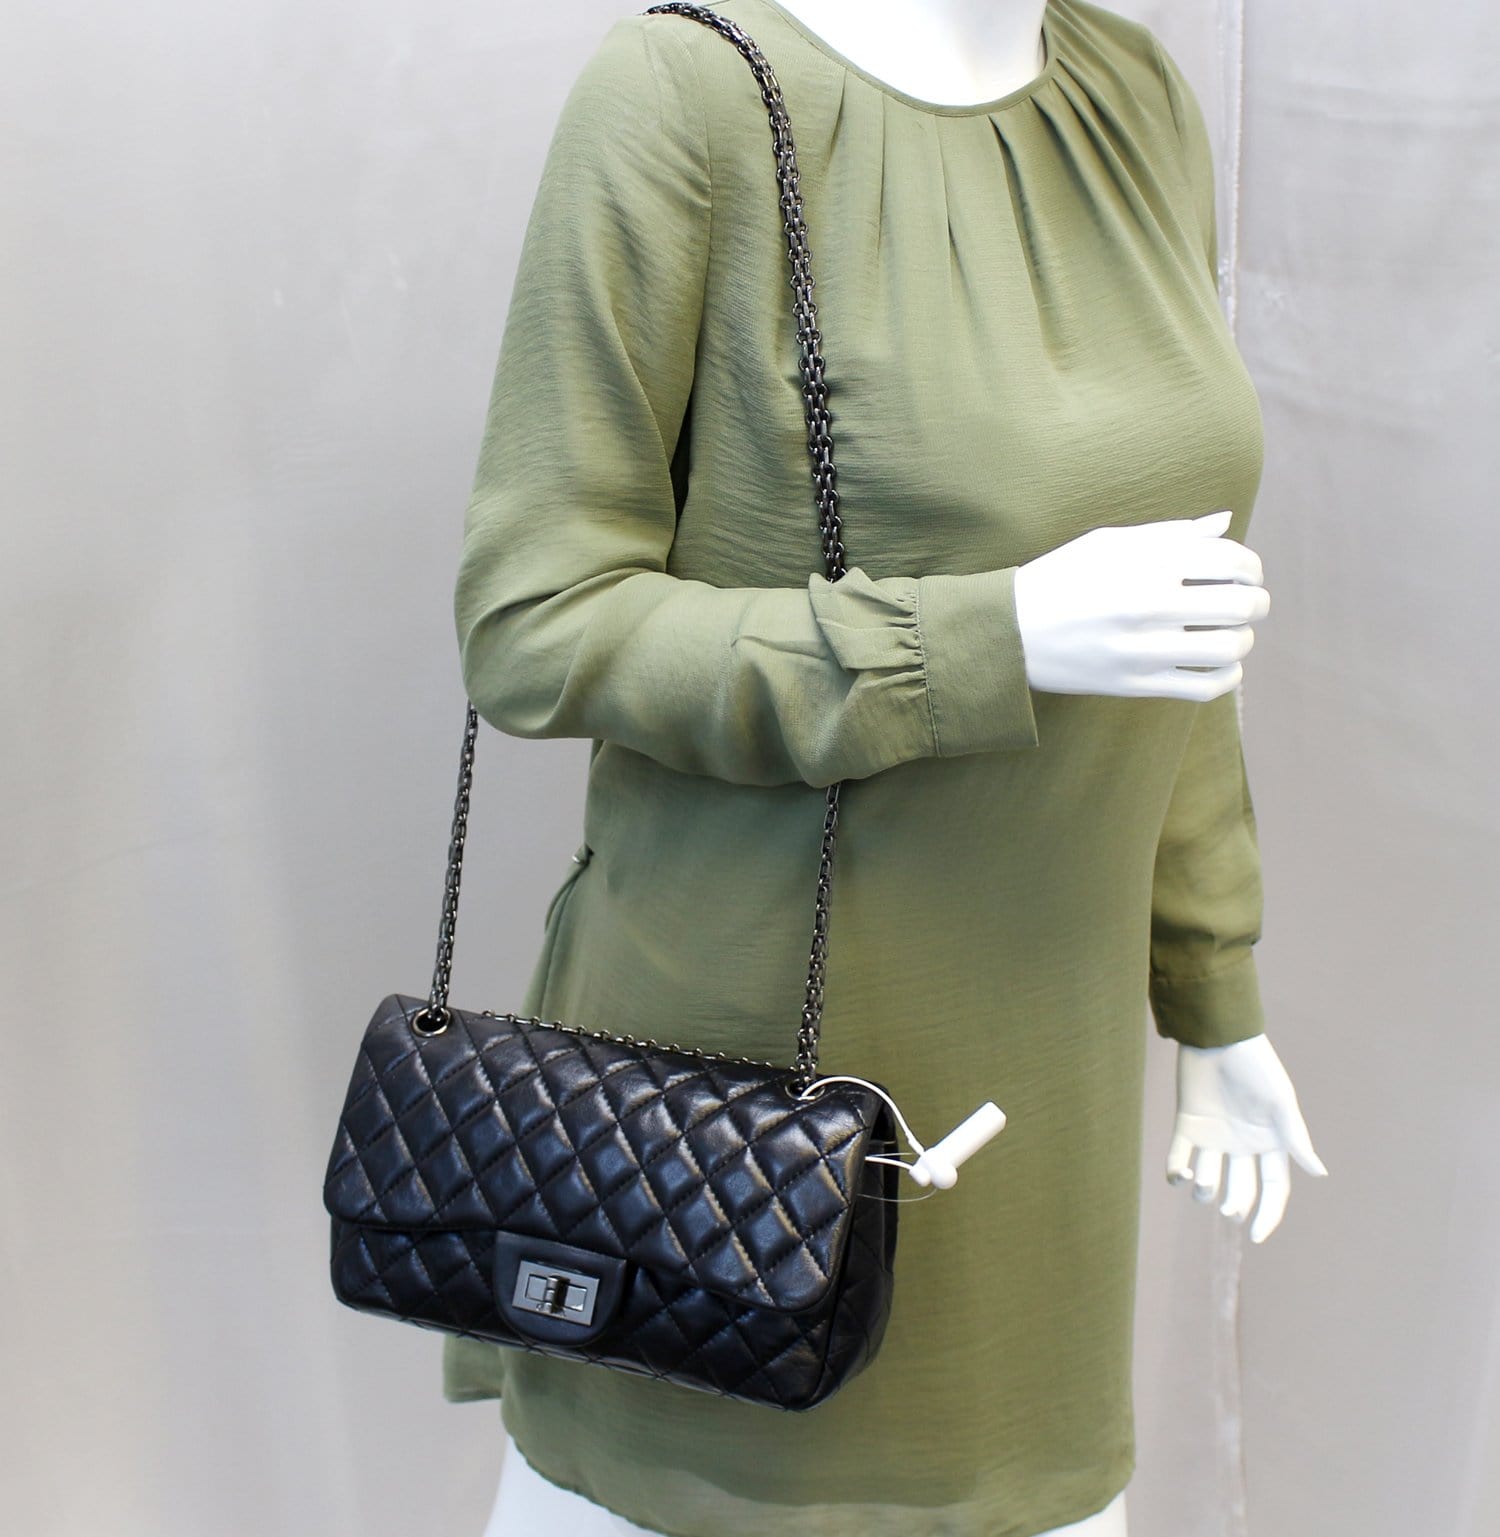 Chanel Bronze 2.55 Quilted Crinkled Calfskin Leather 2.55 Reissue North/South Tote Bag